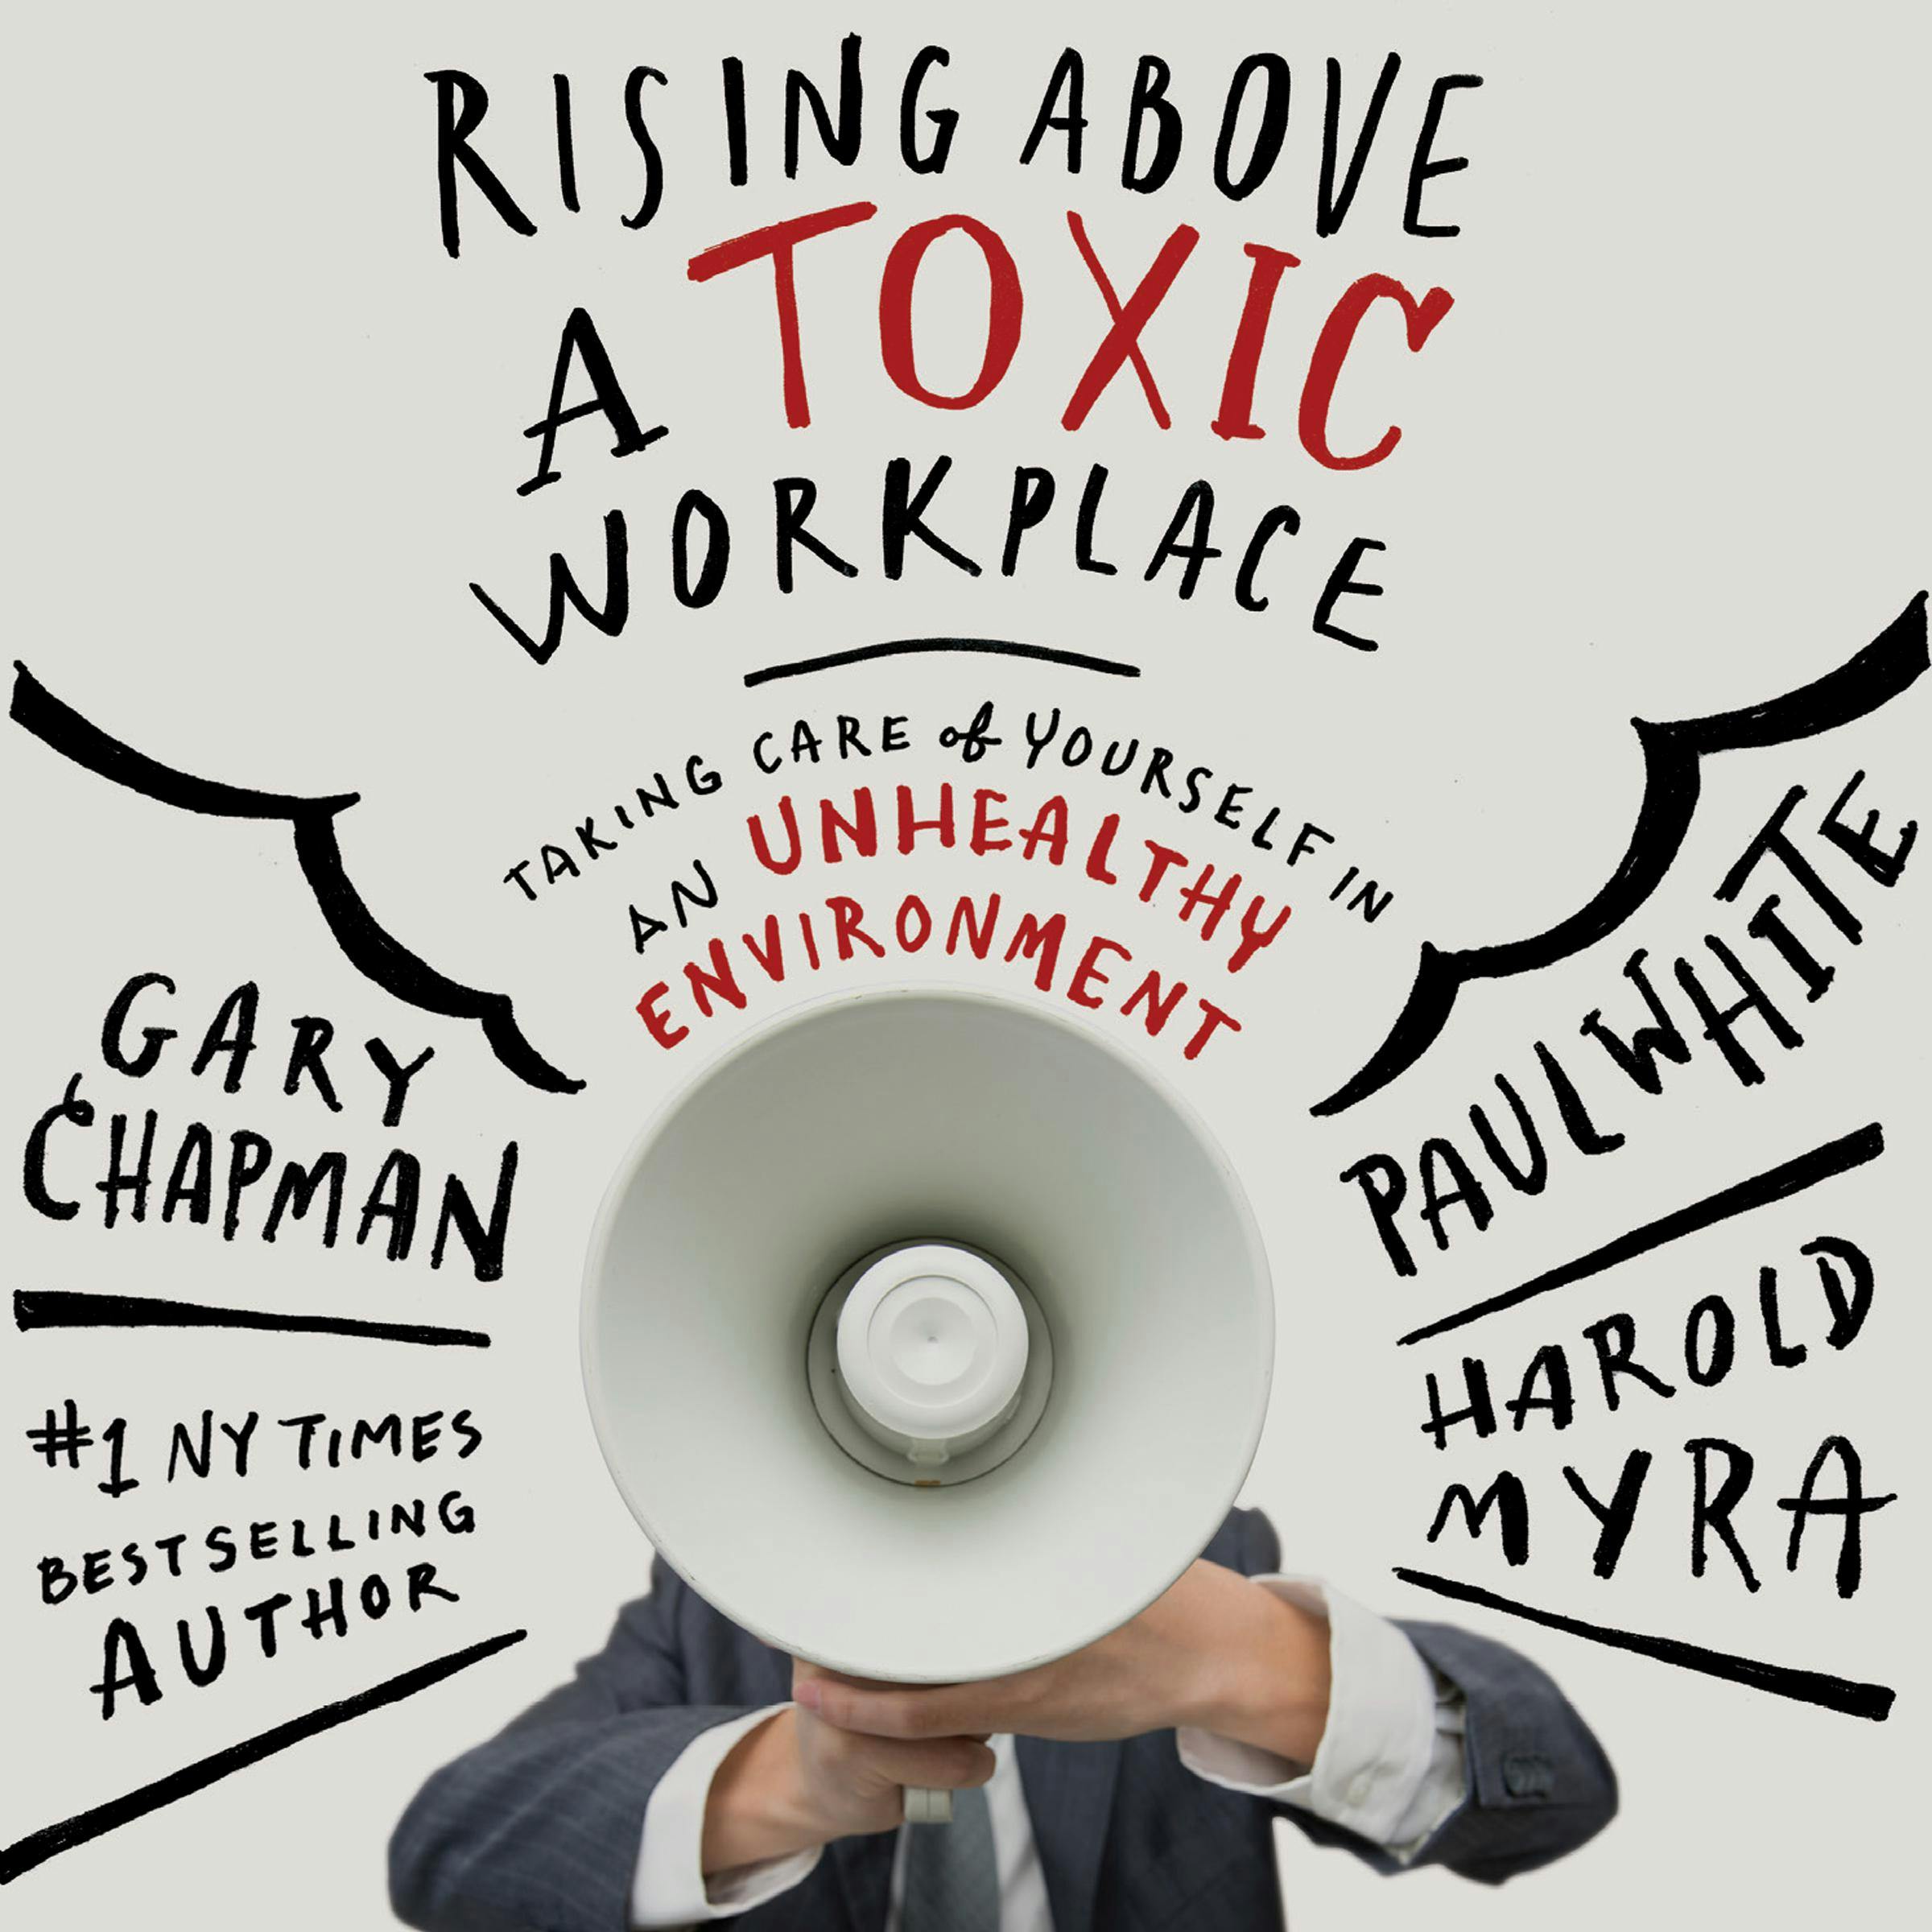 Rising Above a Toxic Workplace: Taking Care of Yourself in an Unhealthy Environment - Paul White, Harold Myra, Gary Chapman